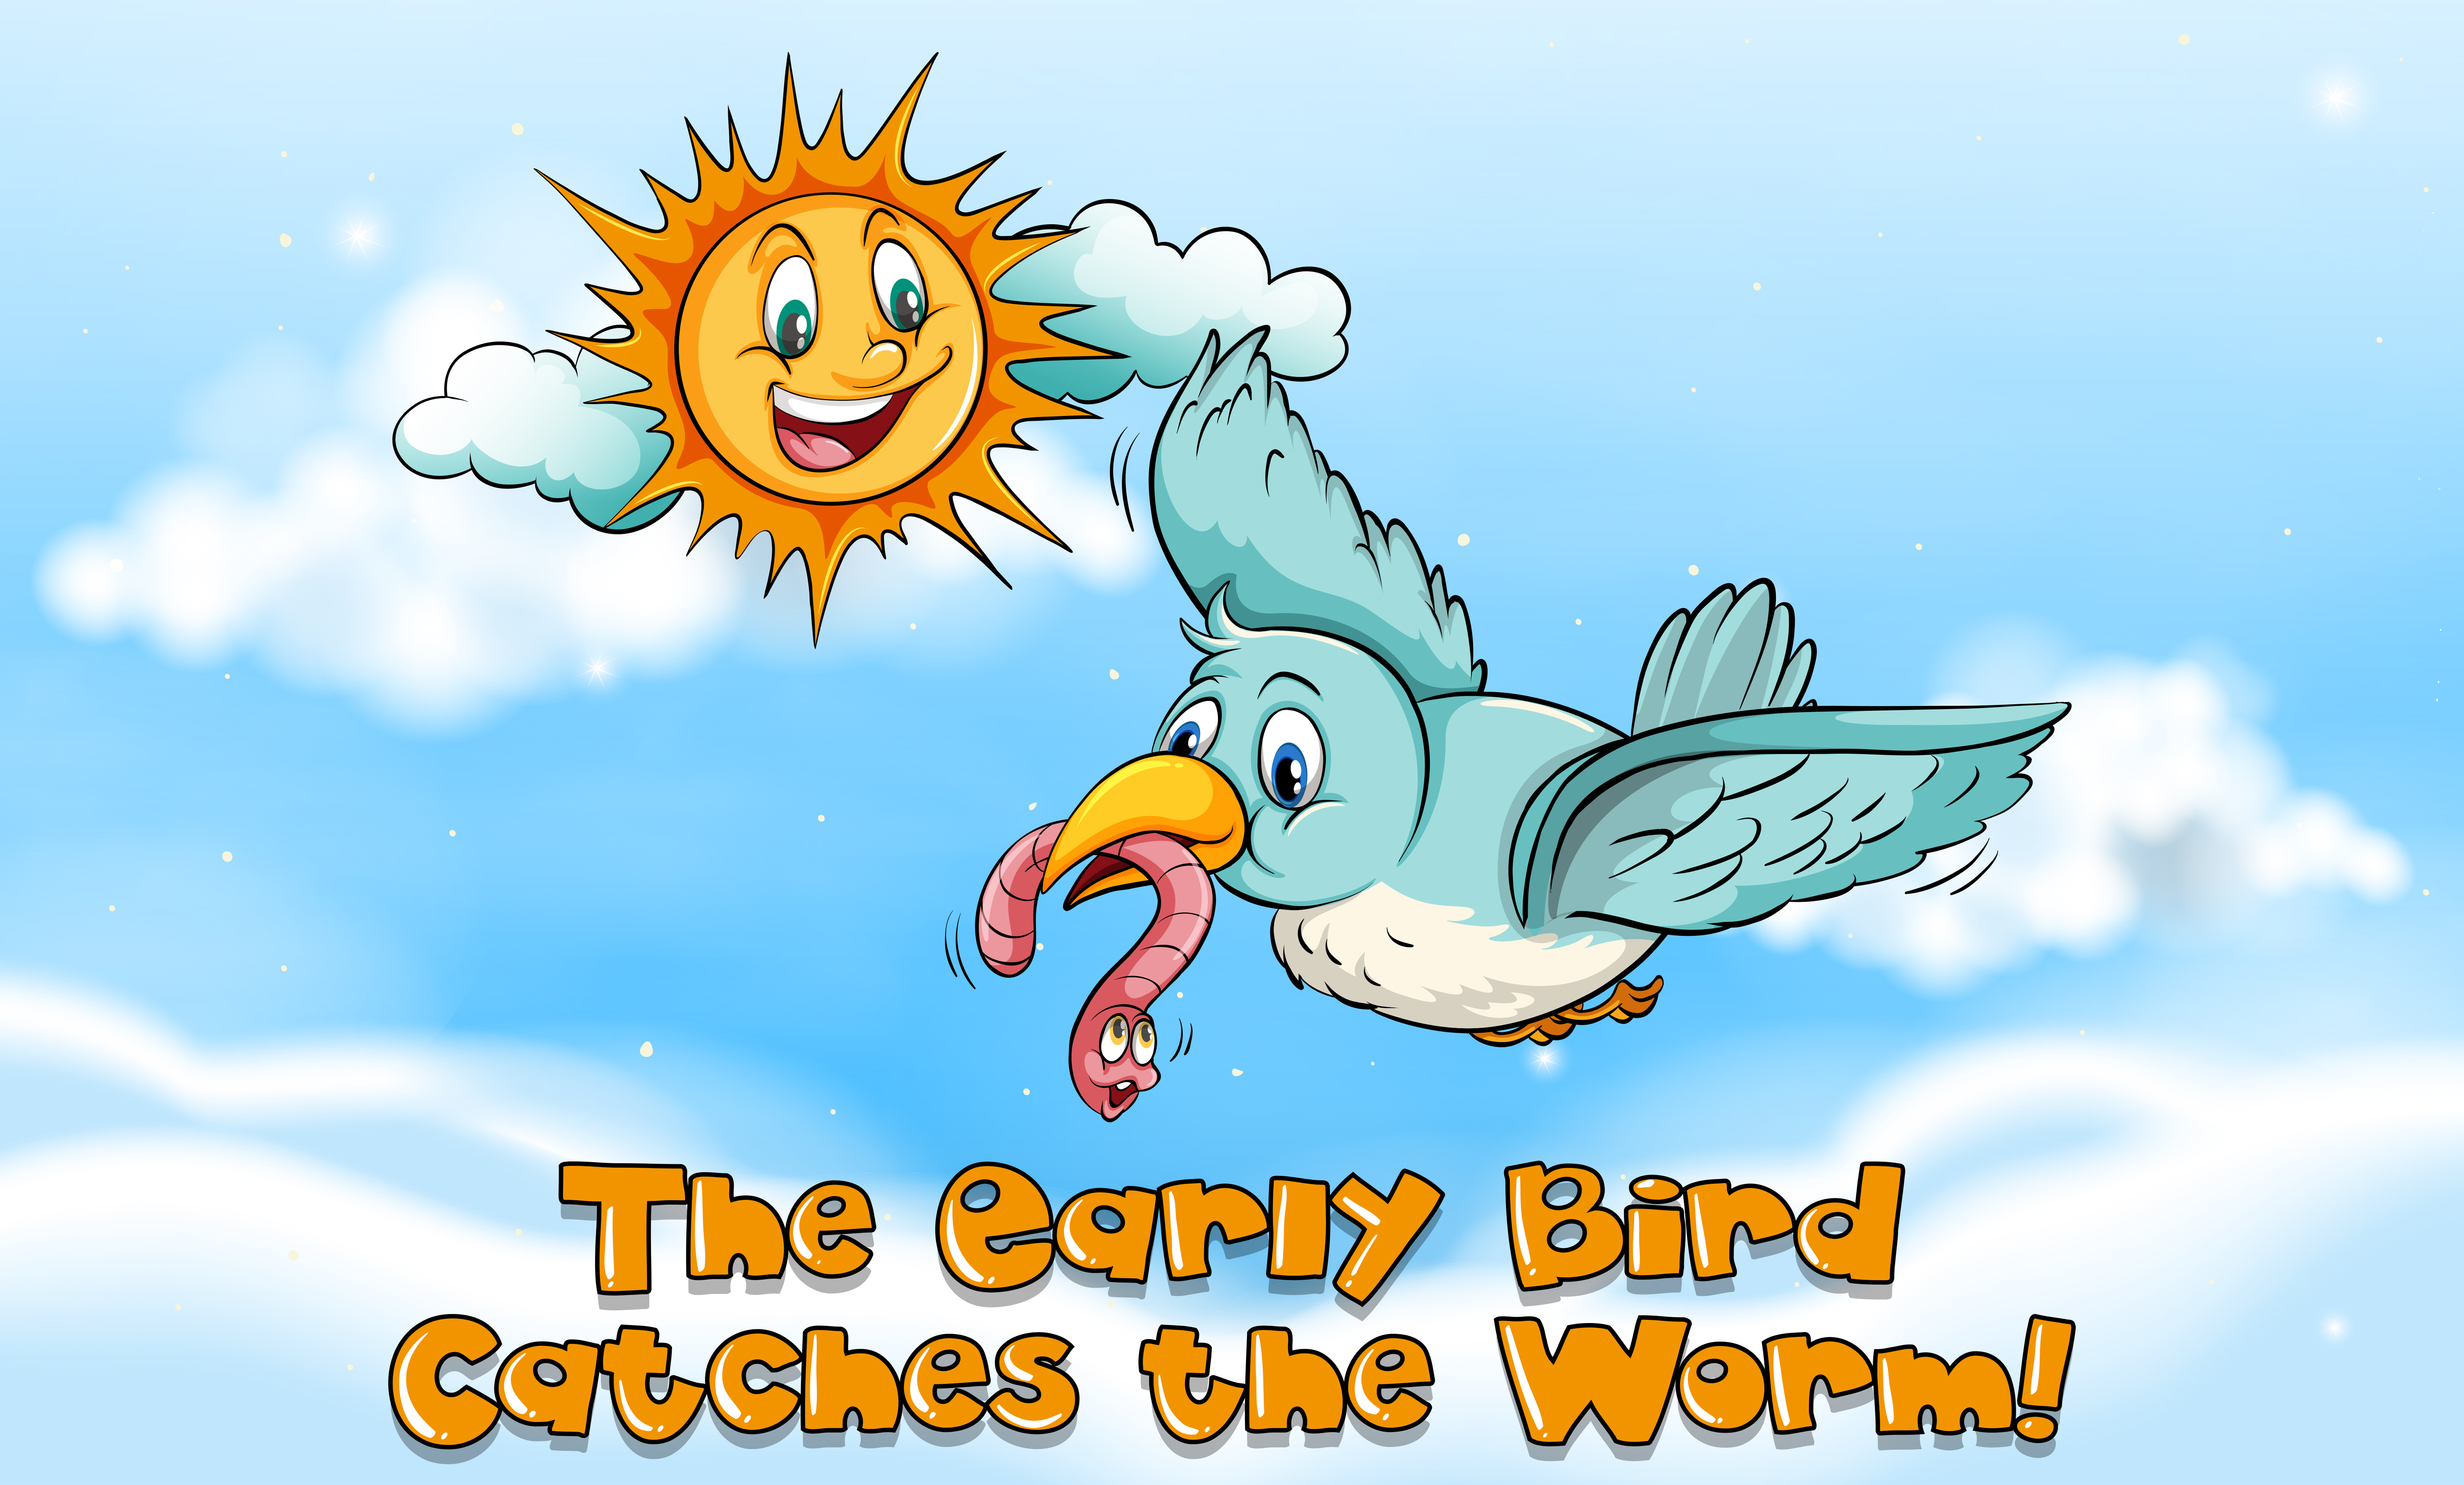 Idiom expression for early bird catches the worm ...
